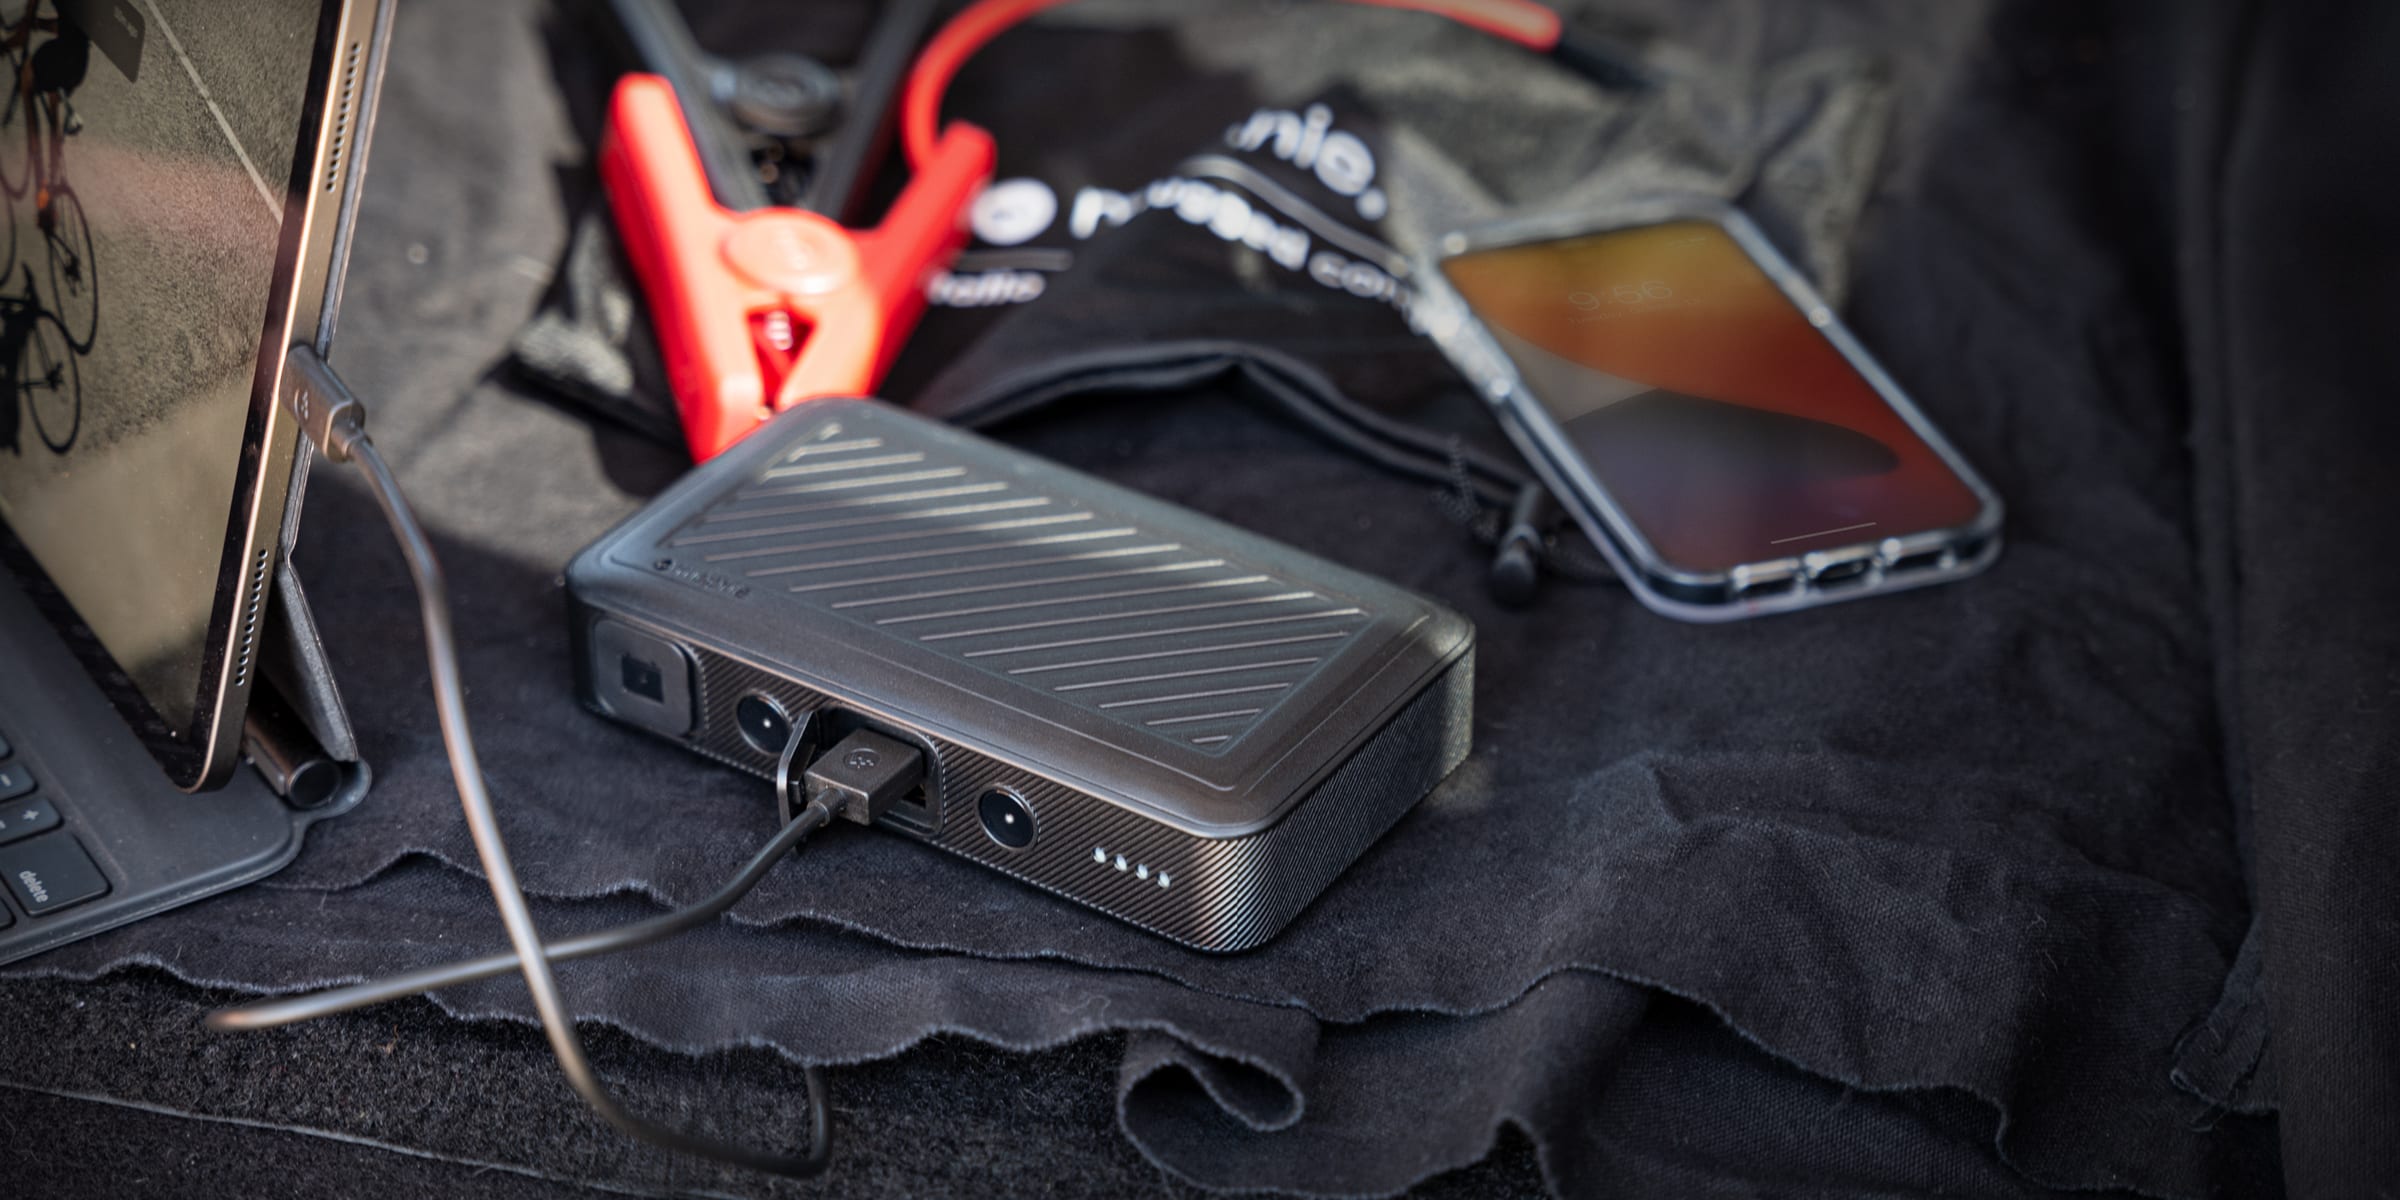 mophie® Powerstation Go Rugged Compact